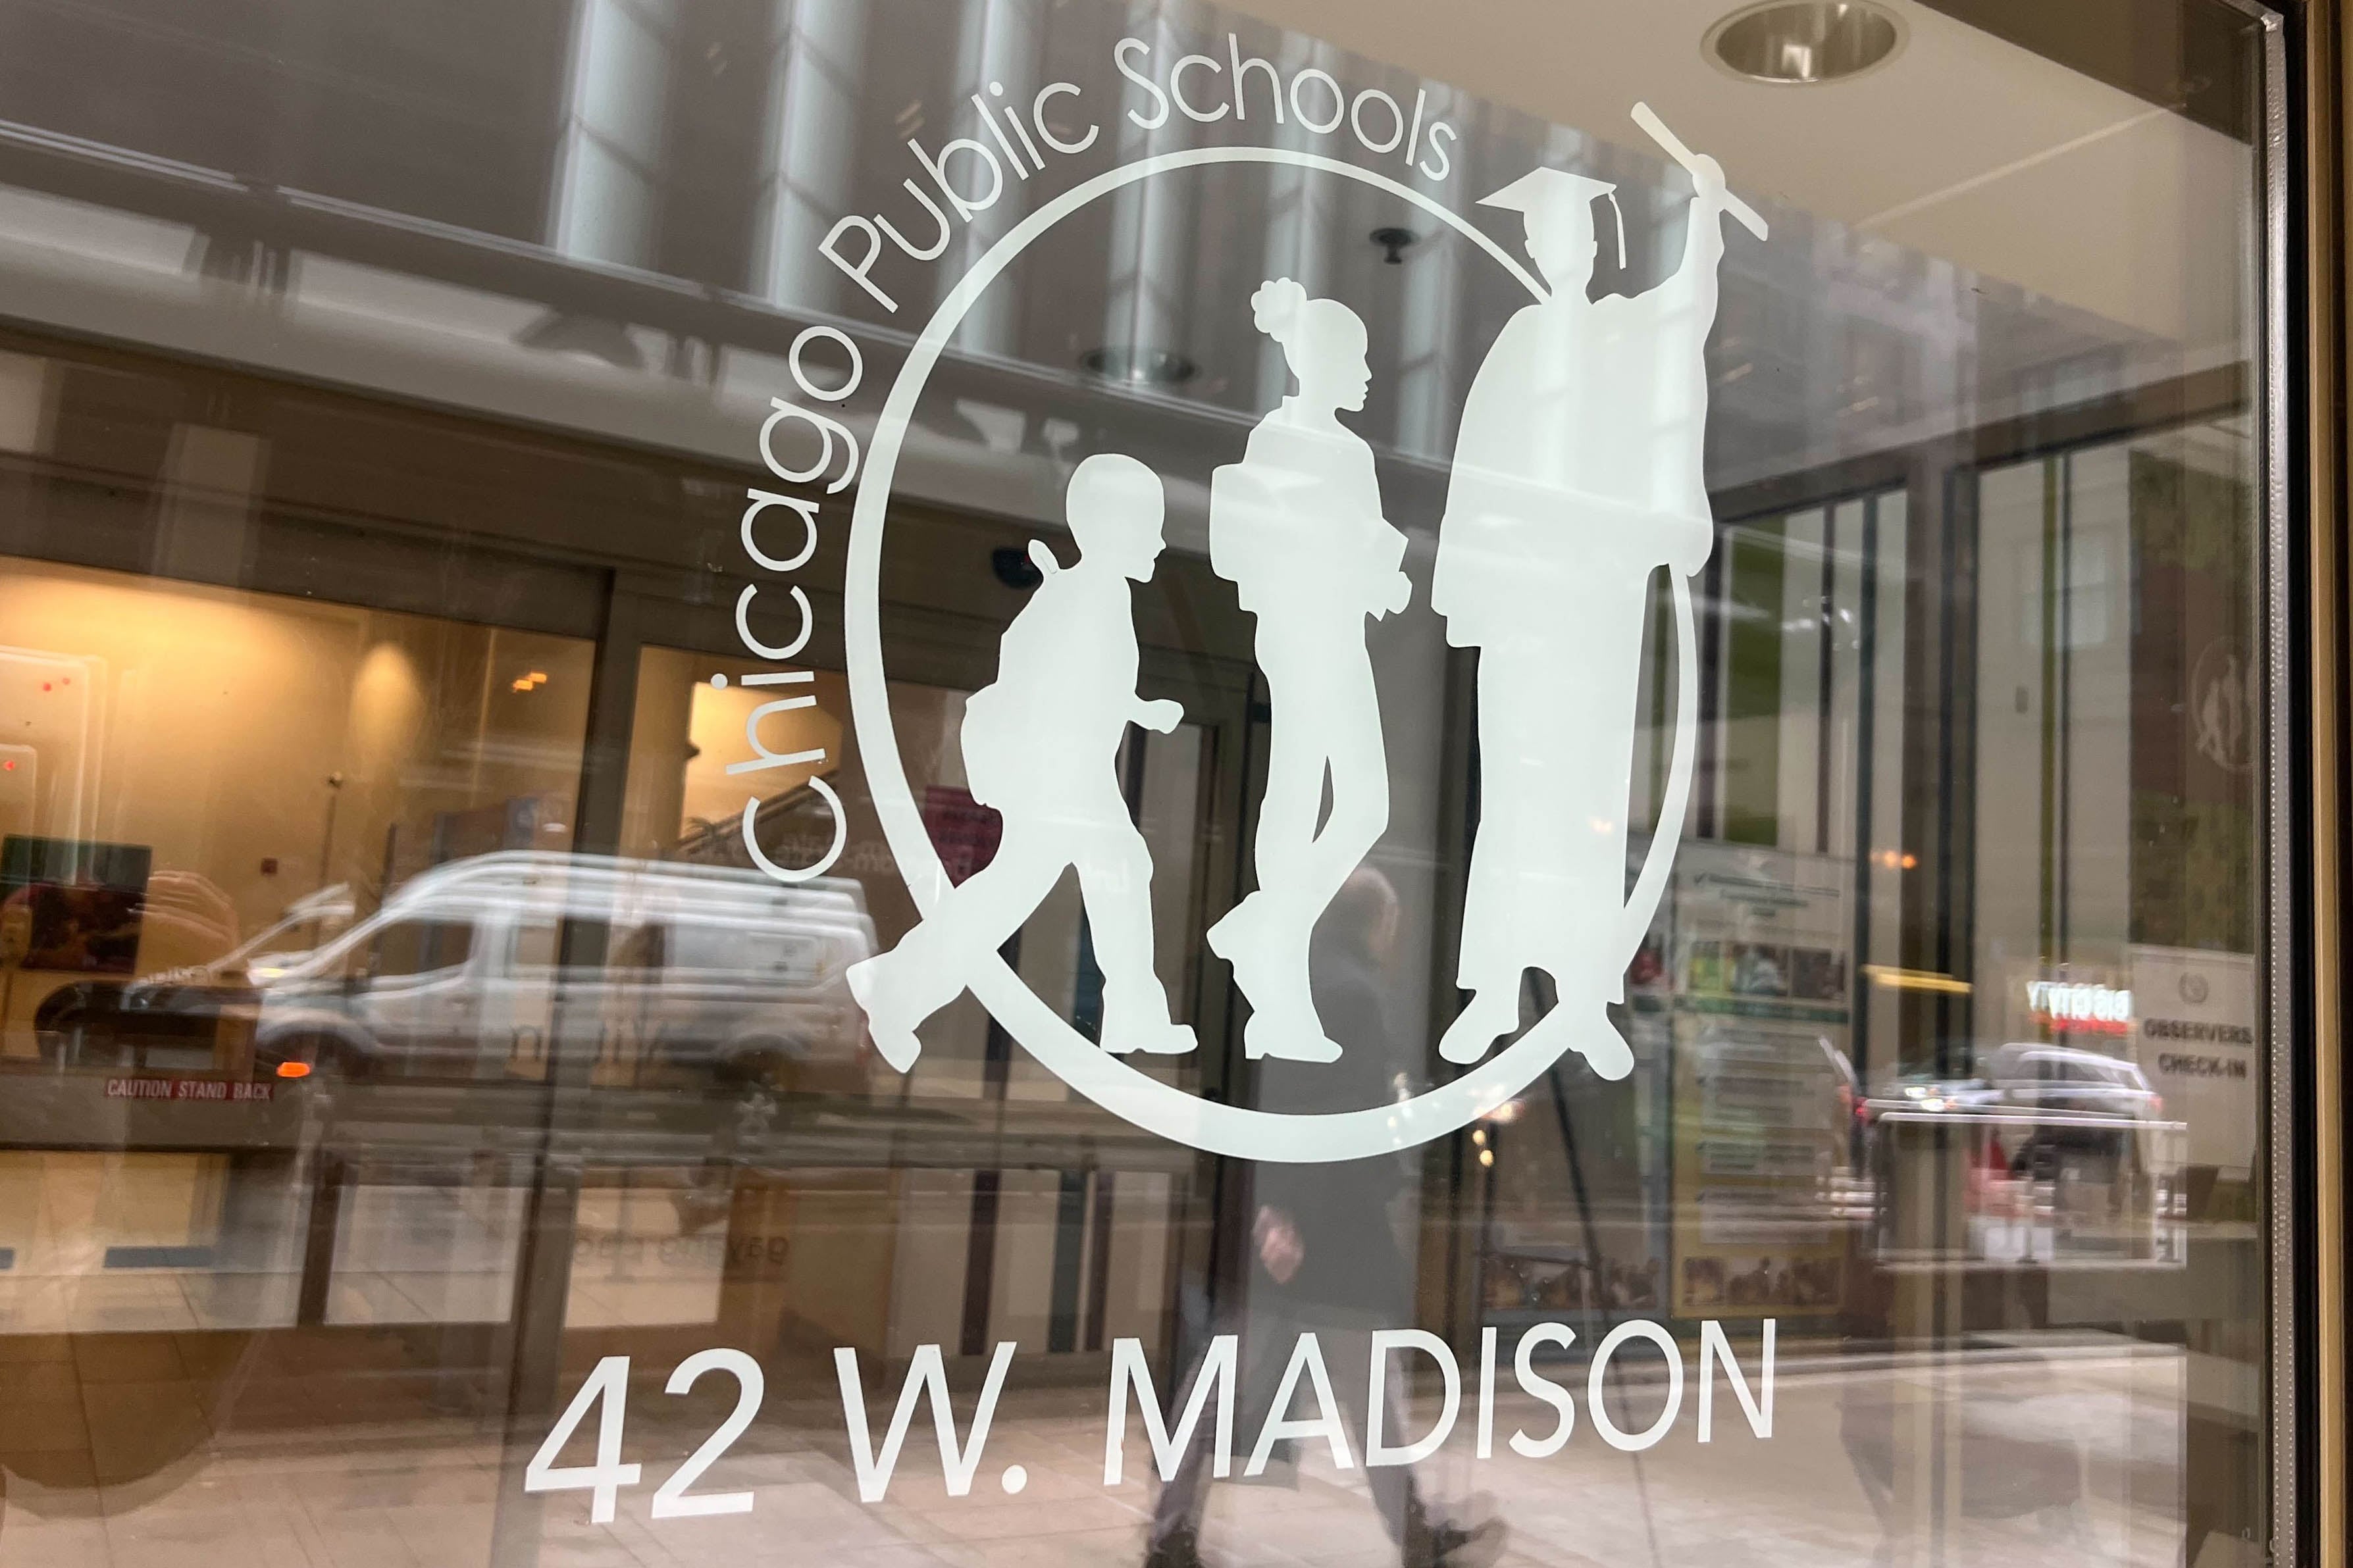 The Chicago Public Schools logo on the side of a glass wall with reflection of cars and people passing in the background.